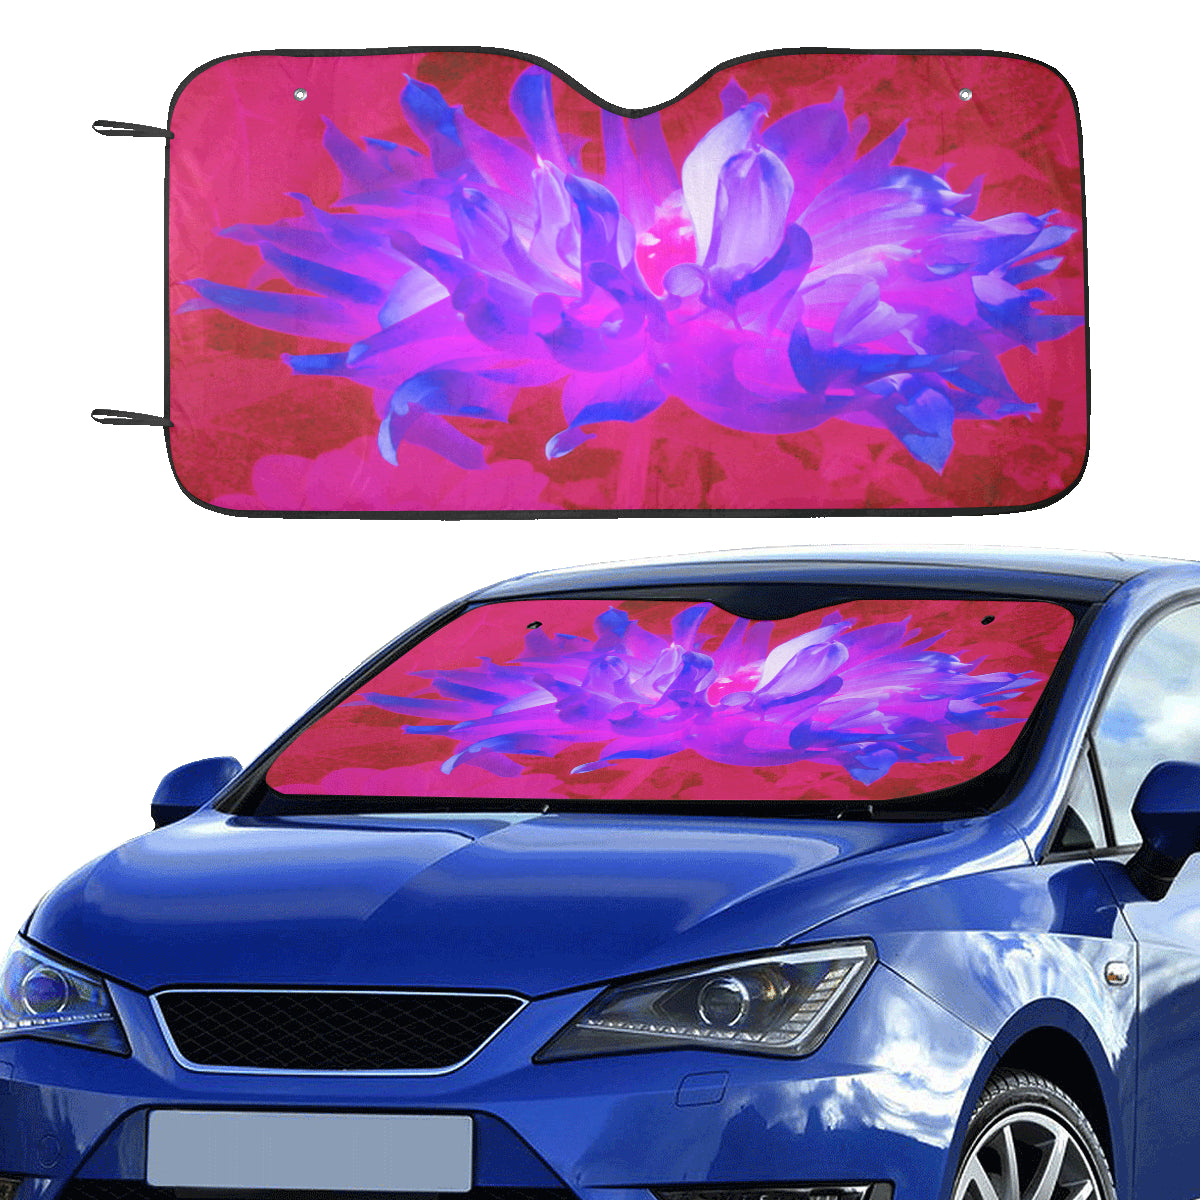 Auto Sun Shade, Stunning Violet Blue and Hot Pink Cactus Dahlia